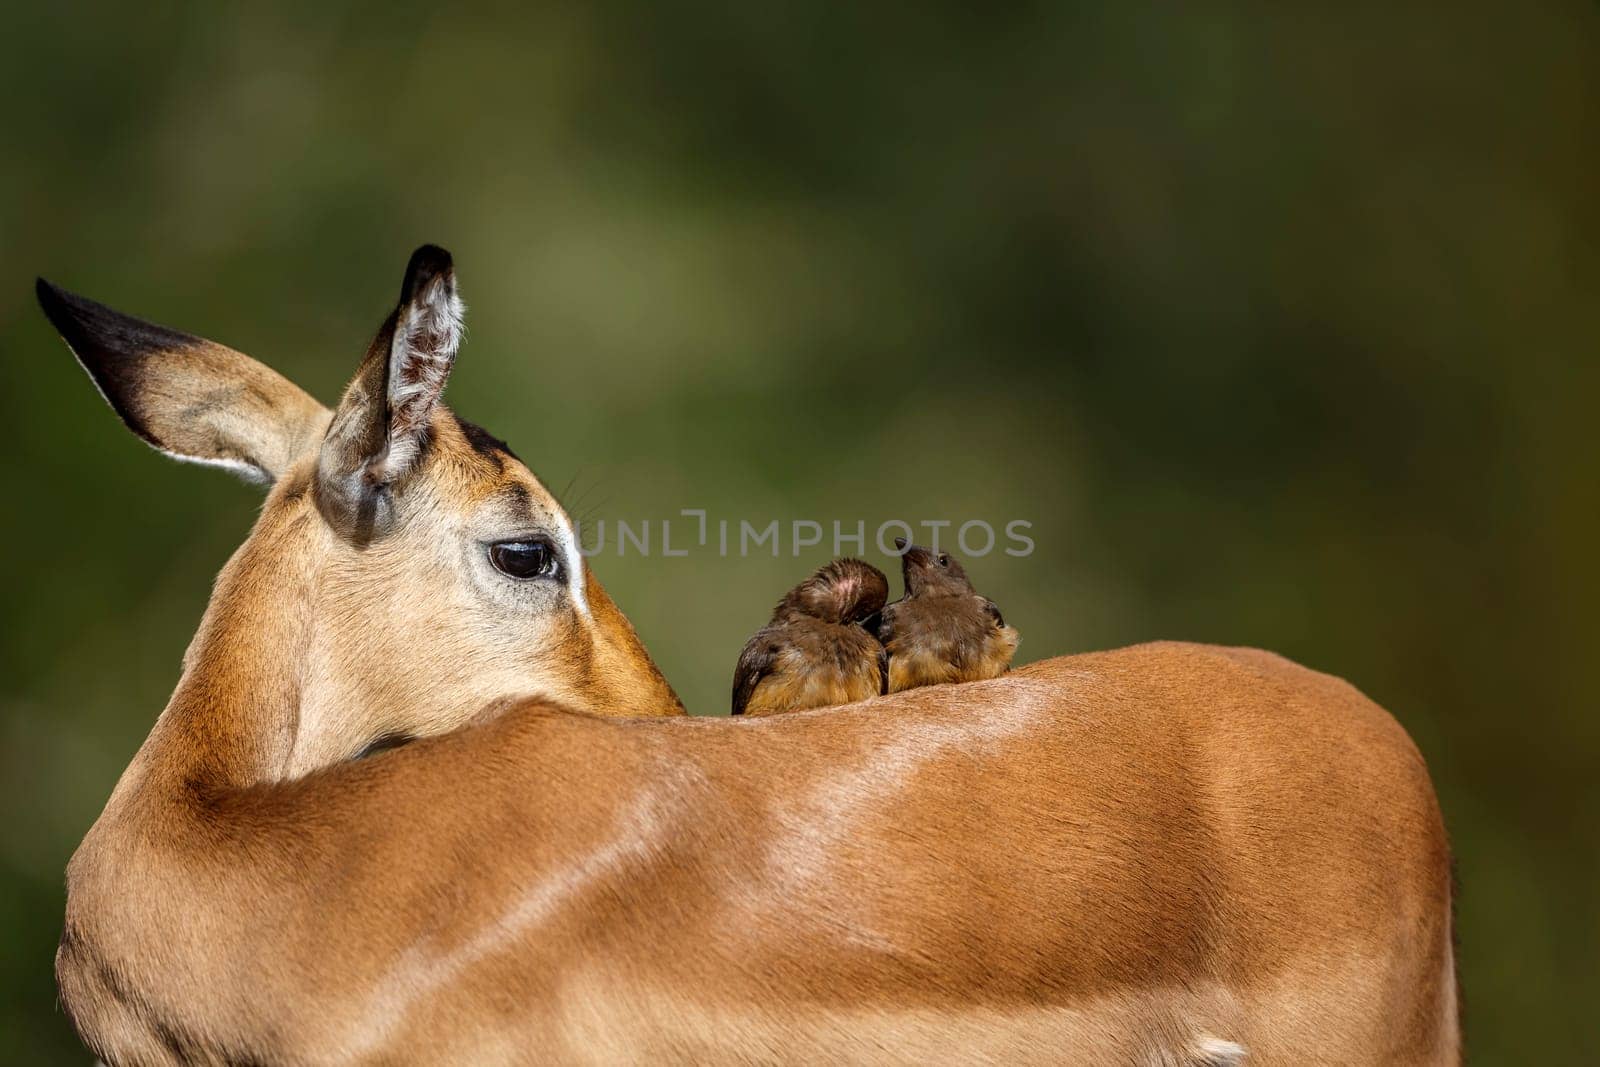 Two Red billed Oxpecker grooming on impala's back in Kruger National park, South Africa ; Specie Buphagus erythrorhynchus family of Buphagidae and Specie Aepyceros melampus family of Bovidae